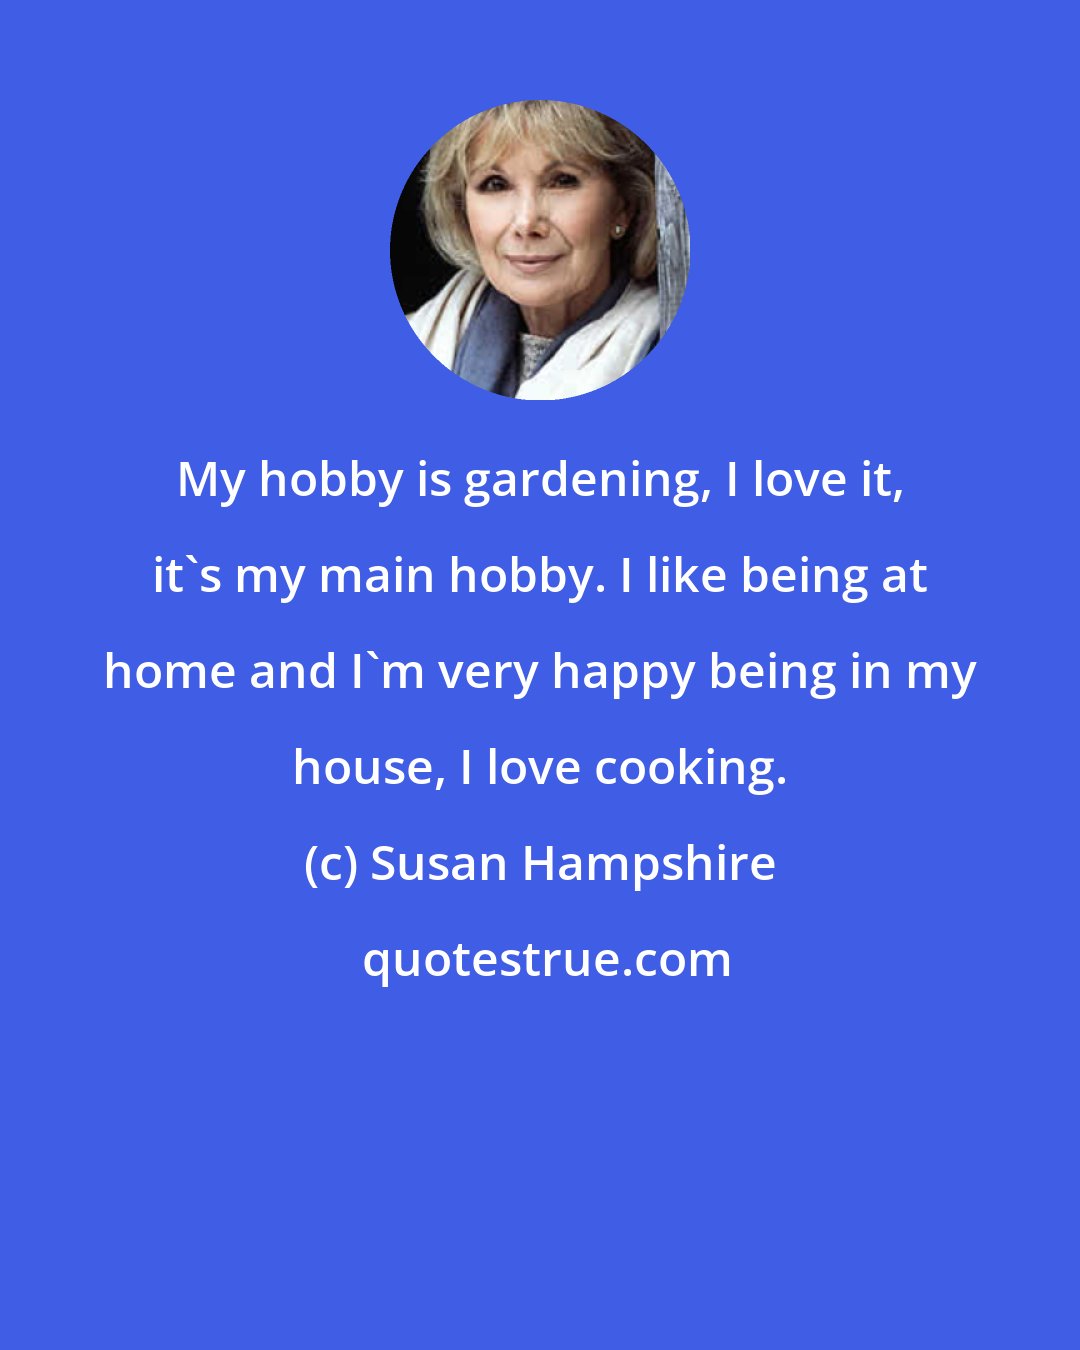 Susan Hampshire: My hobby is gardening, I love it, it's my main hobby. I like being at home and I'm very happy being in my house, I love cooking.